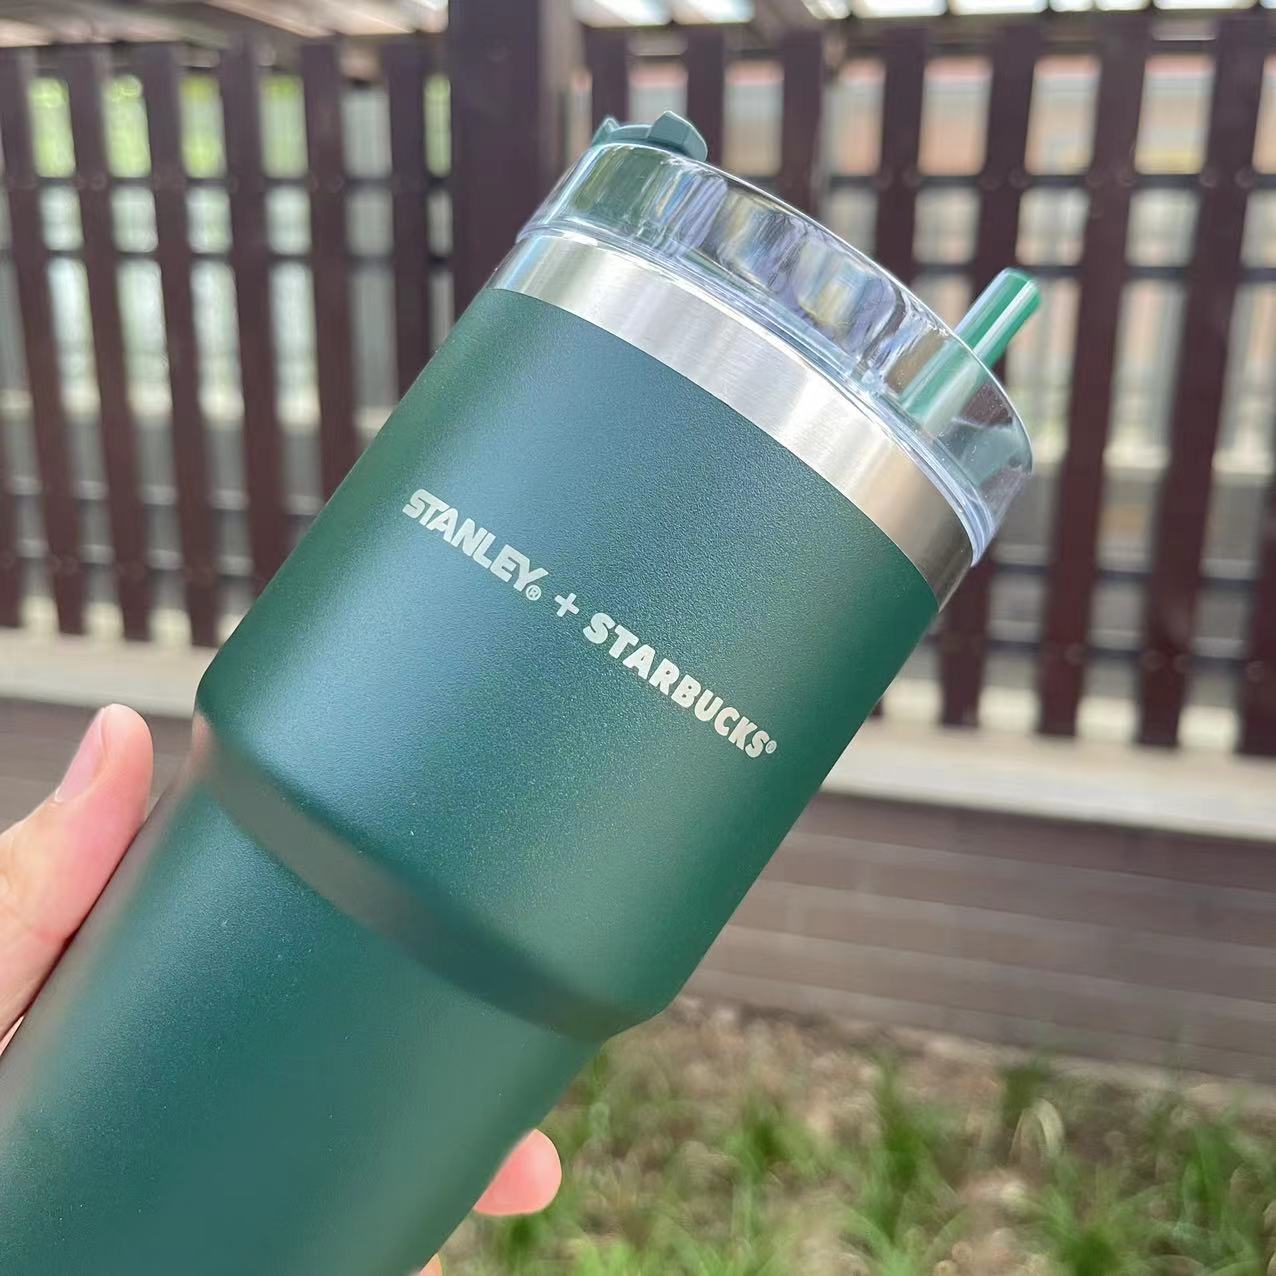 Stanley x Starbucks cups: Where to buy and all you need to know